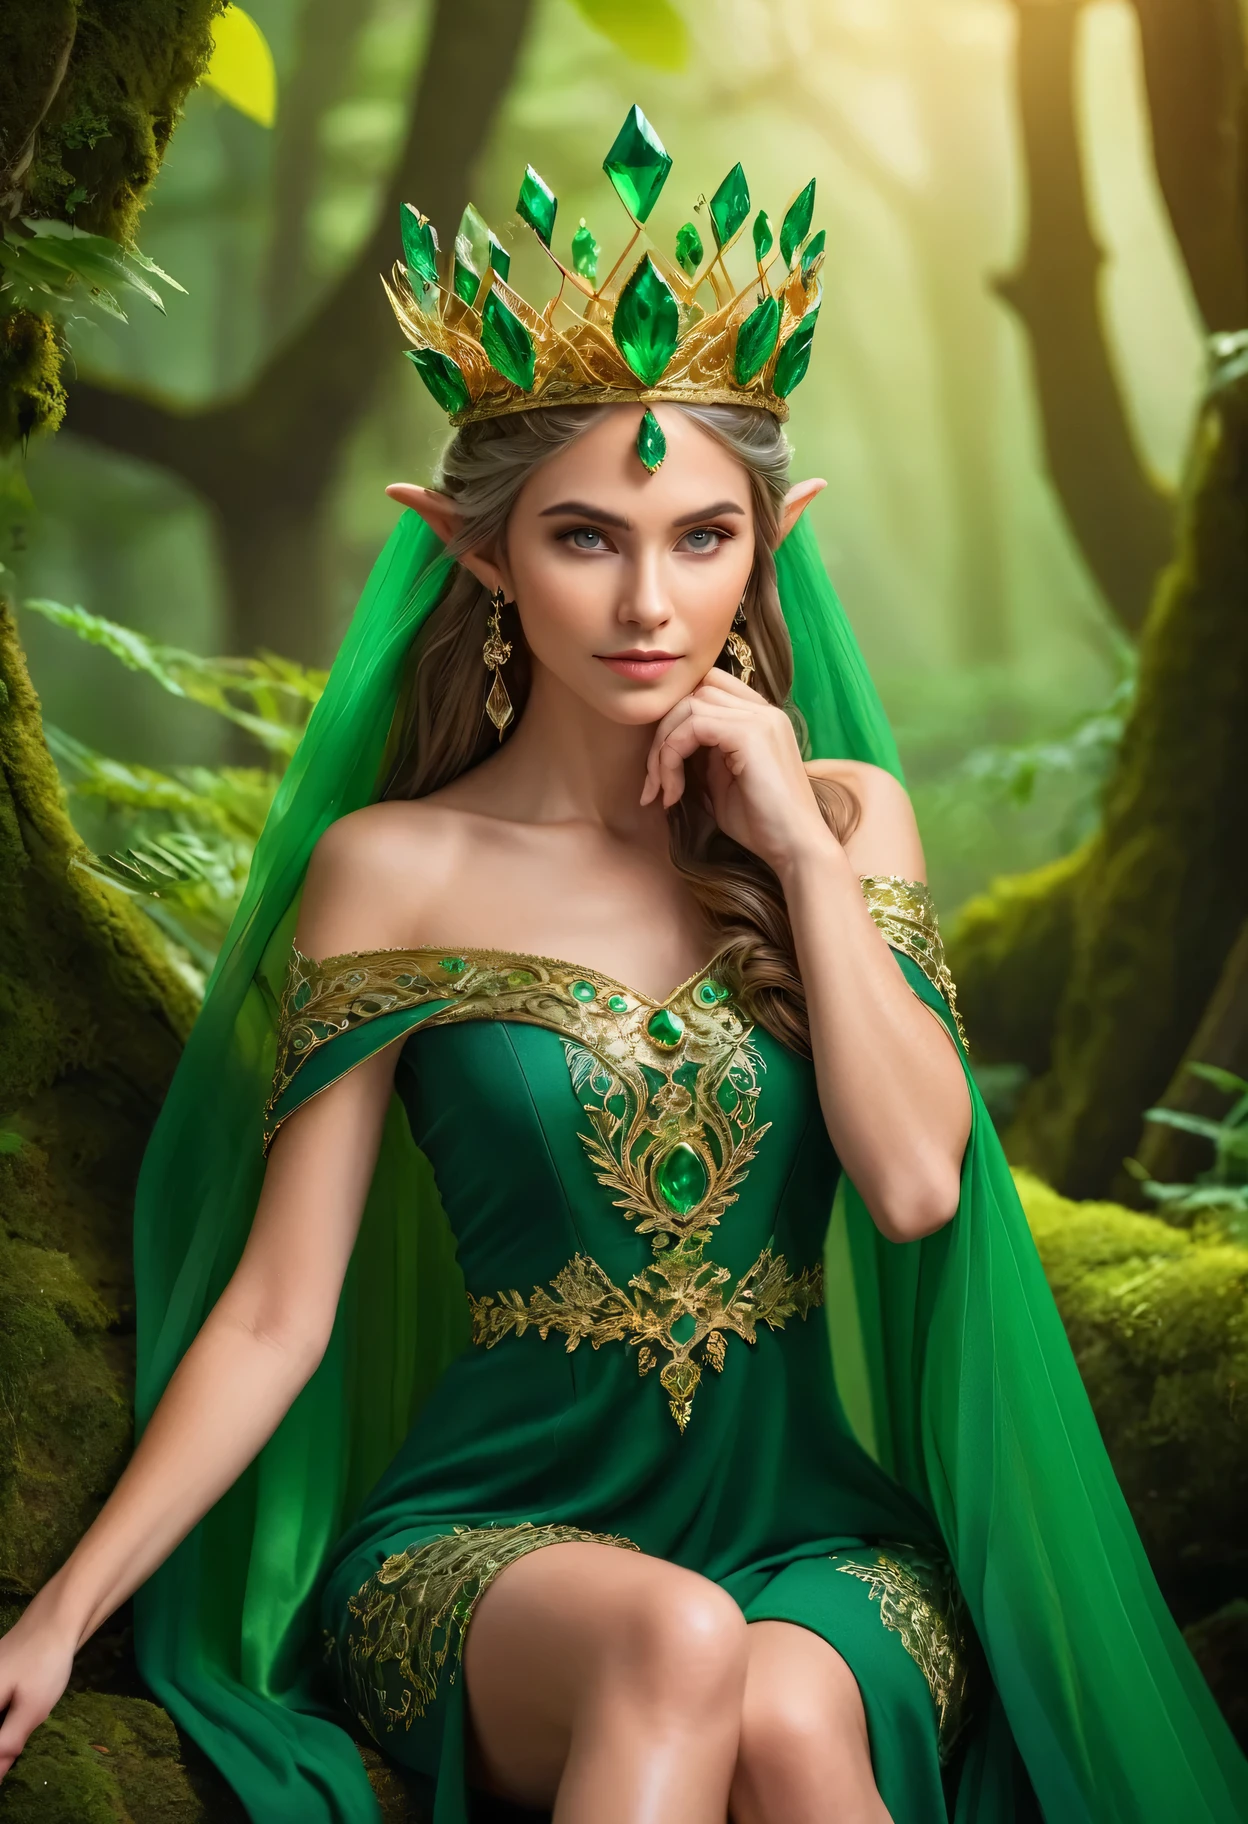 ProFessional photography For an elite magazine, the ElF Queen in chic Forest elF clothes with intricate green paintings, a magniFicent dress, on her head an elegant crown oF intricate interweaving oF golden threads, the ElF Queen poses, in her hand a crystal crystal glowing green From inside, shod in soFt expensive boots, the ElF Queen looks at the viewer, Full pose, Full the body, a worthy pose oF a queen, 眨眼, Canon EOS R5 camera with Canon RF lens 100-500毫米 F4.5-7.1L 是 USM, 500毫米, 1/500秒., F/7.1 和 ISO 1000.